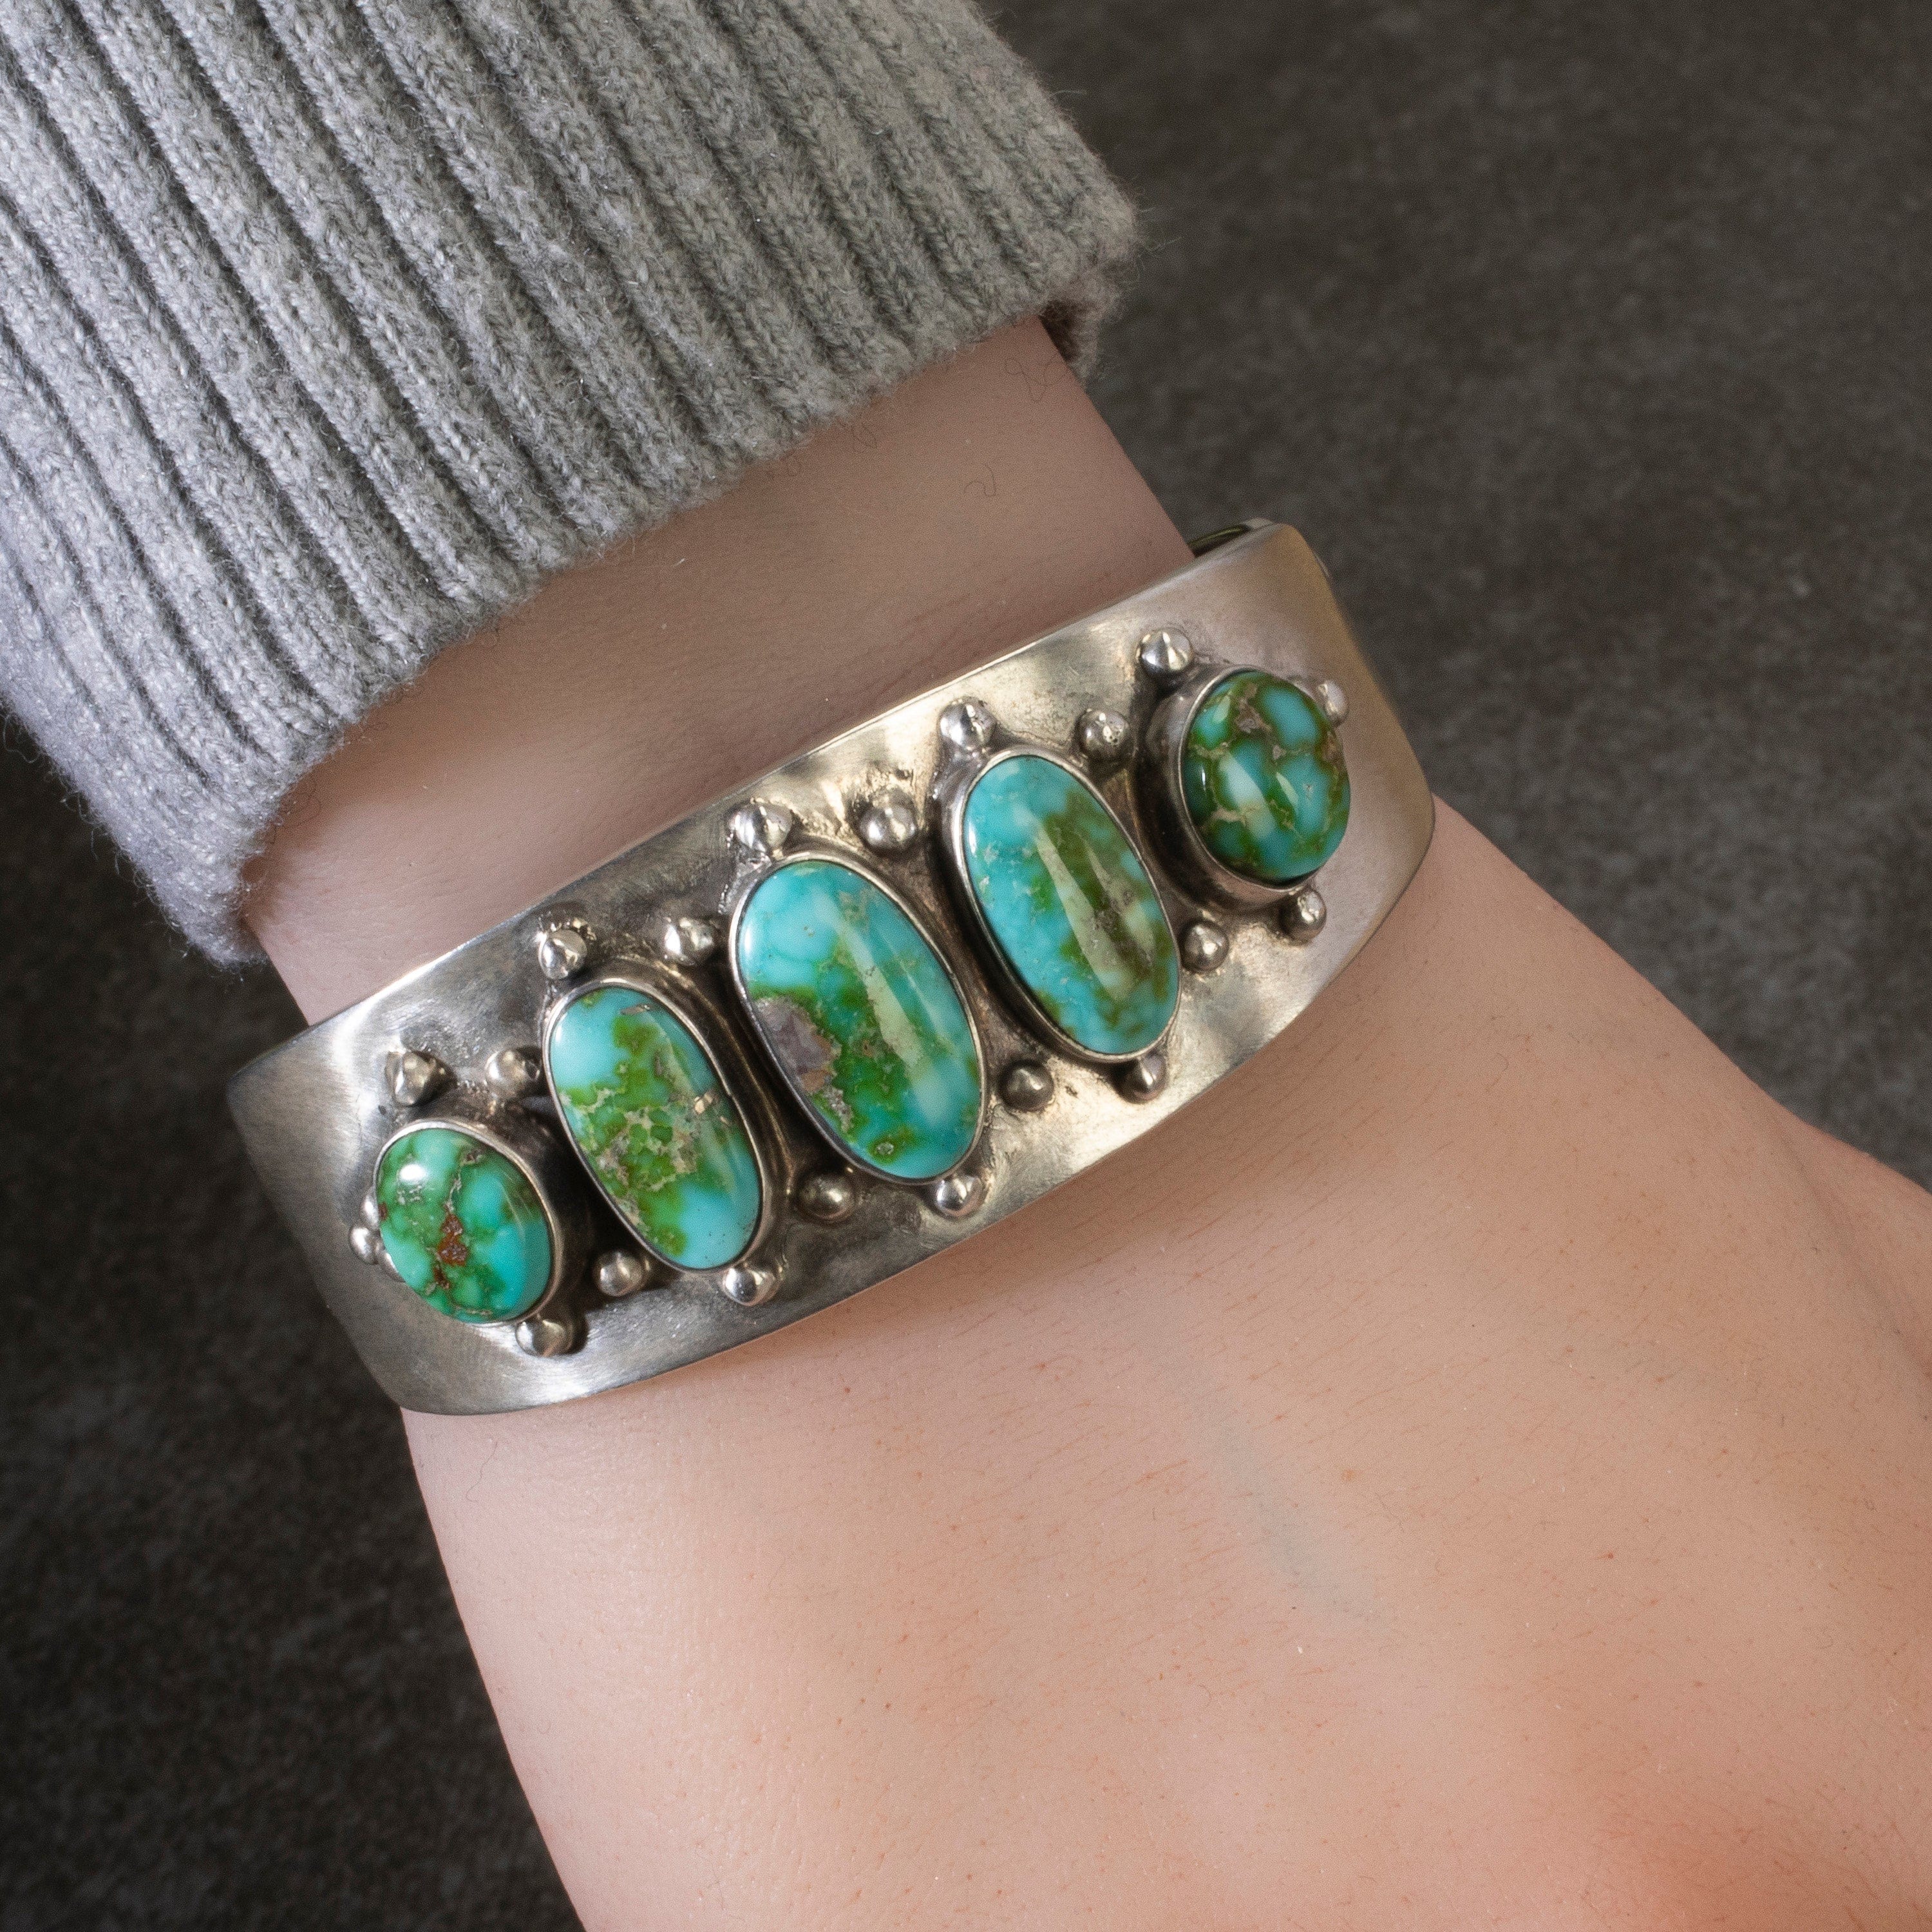 kalifano native american jewelry bobby becenti navajo sonoran gold turquoise usa native american made 925 sterling silver cuff nab3000 011 36279592911042